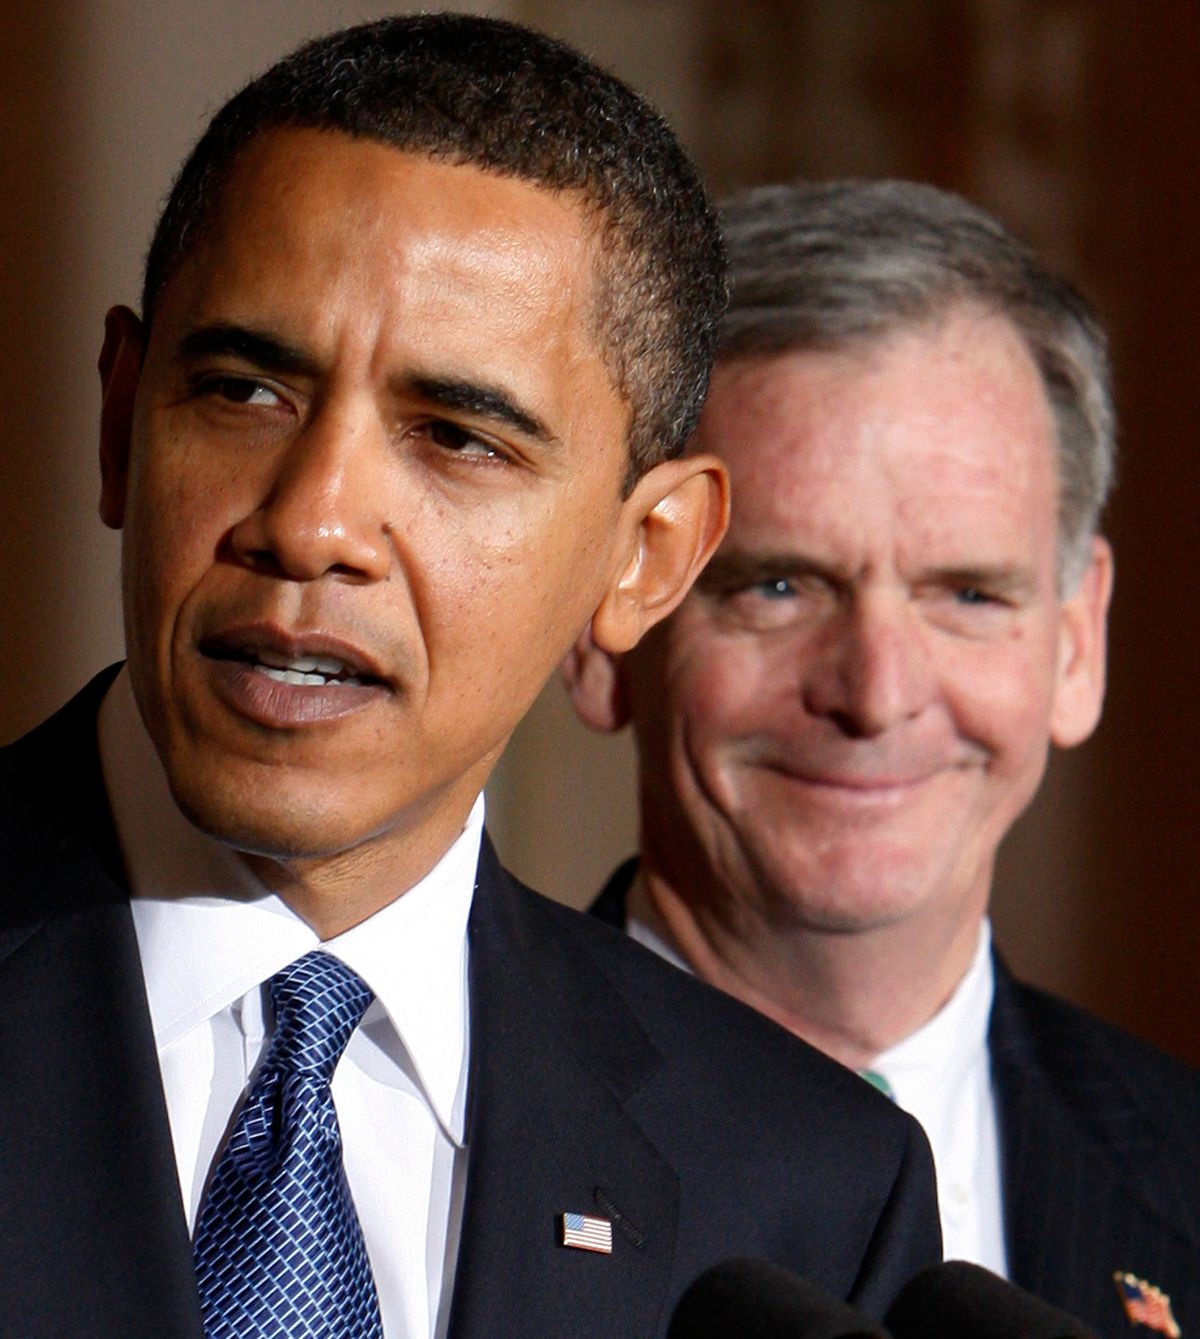 U.S. President Barack Obama (L) announces his nominee for Commerce Secretary Sen. Judd Gregg (R-NH) in the Grand Foyer of the White House in Washington February 3, 2009.    REUTERS/Jim Young    (UNITED STATES)  (Reuters)